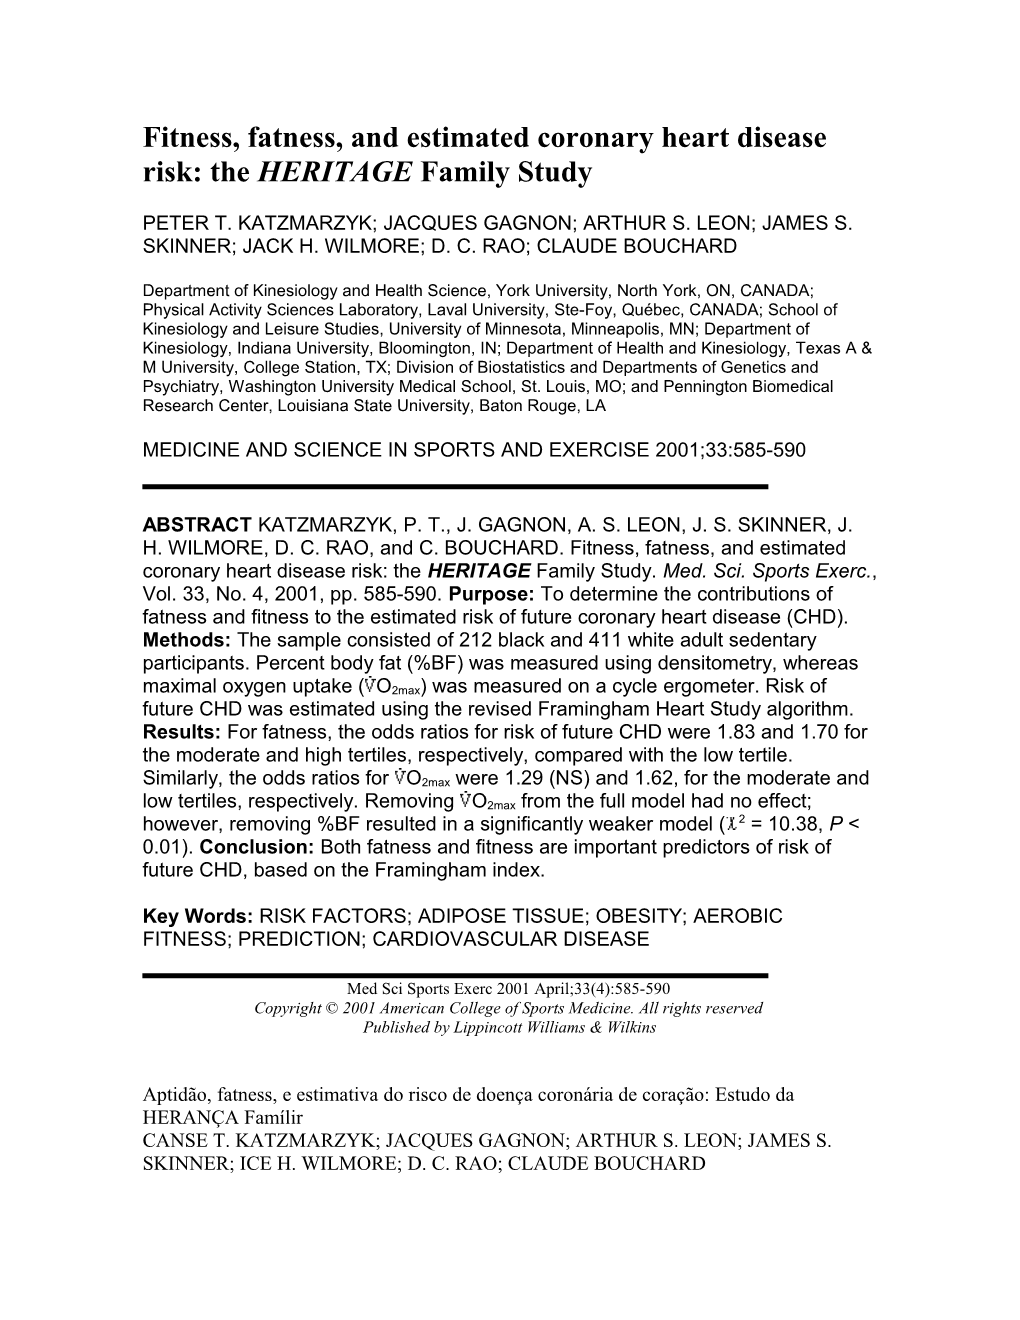 Fitness, Fatness, and Estimated Coronary Heart Disease Risk: the HERITAGE Family Study